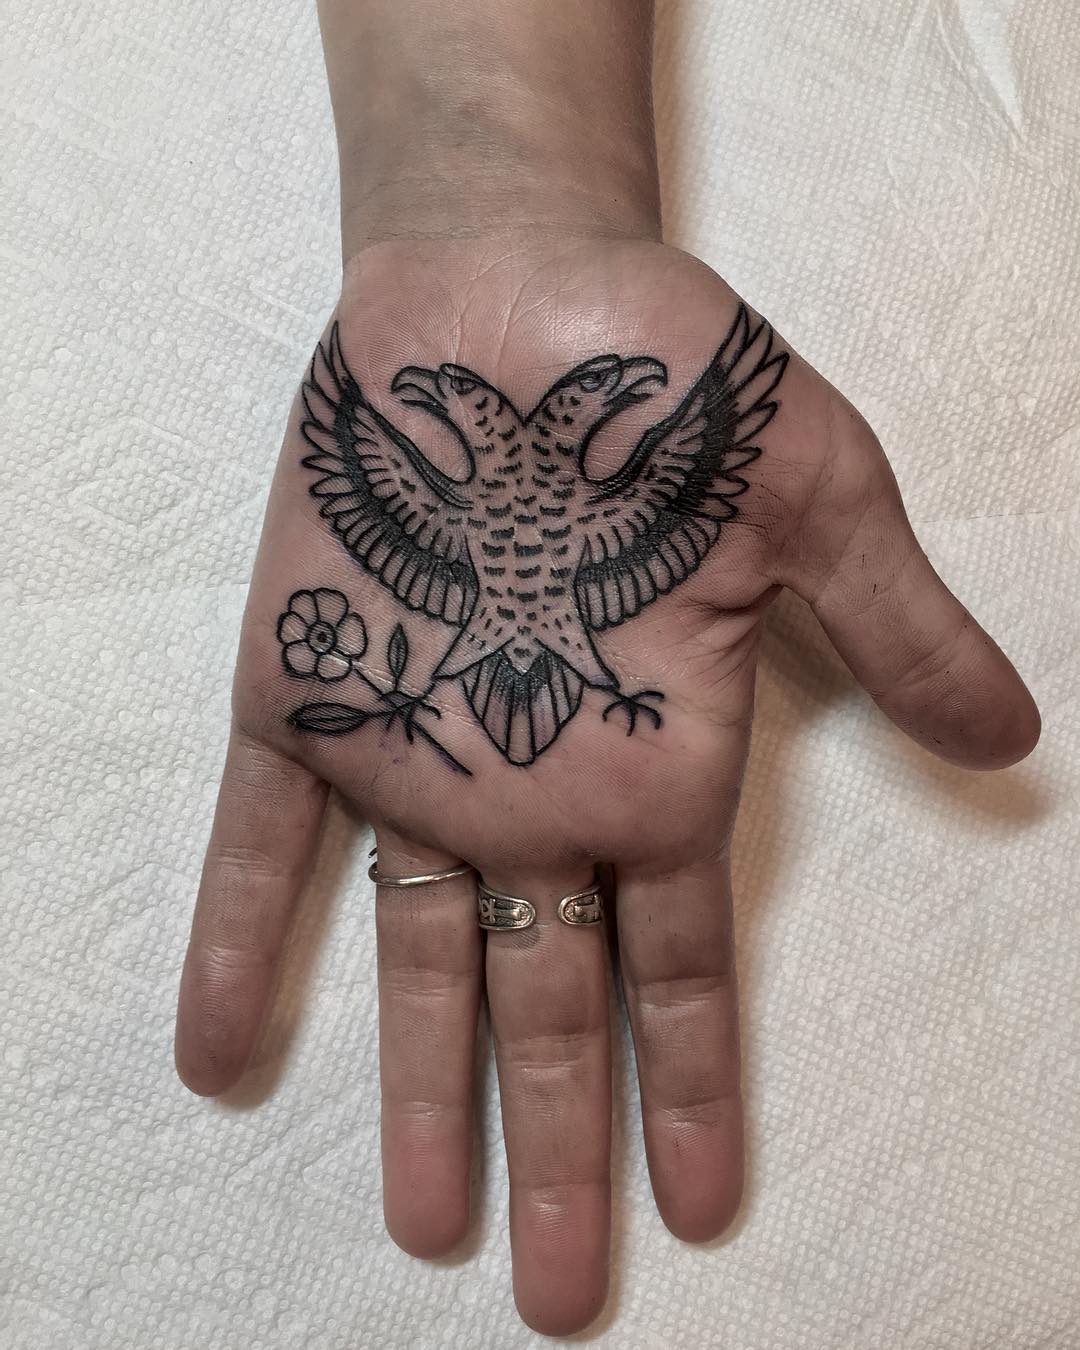 Double eagle by @justinoliviertattoo